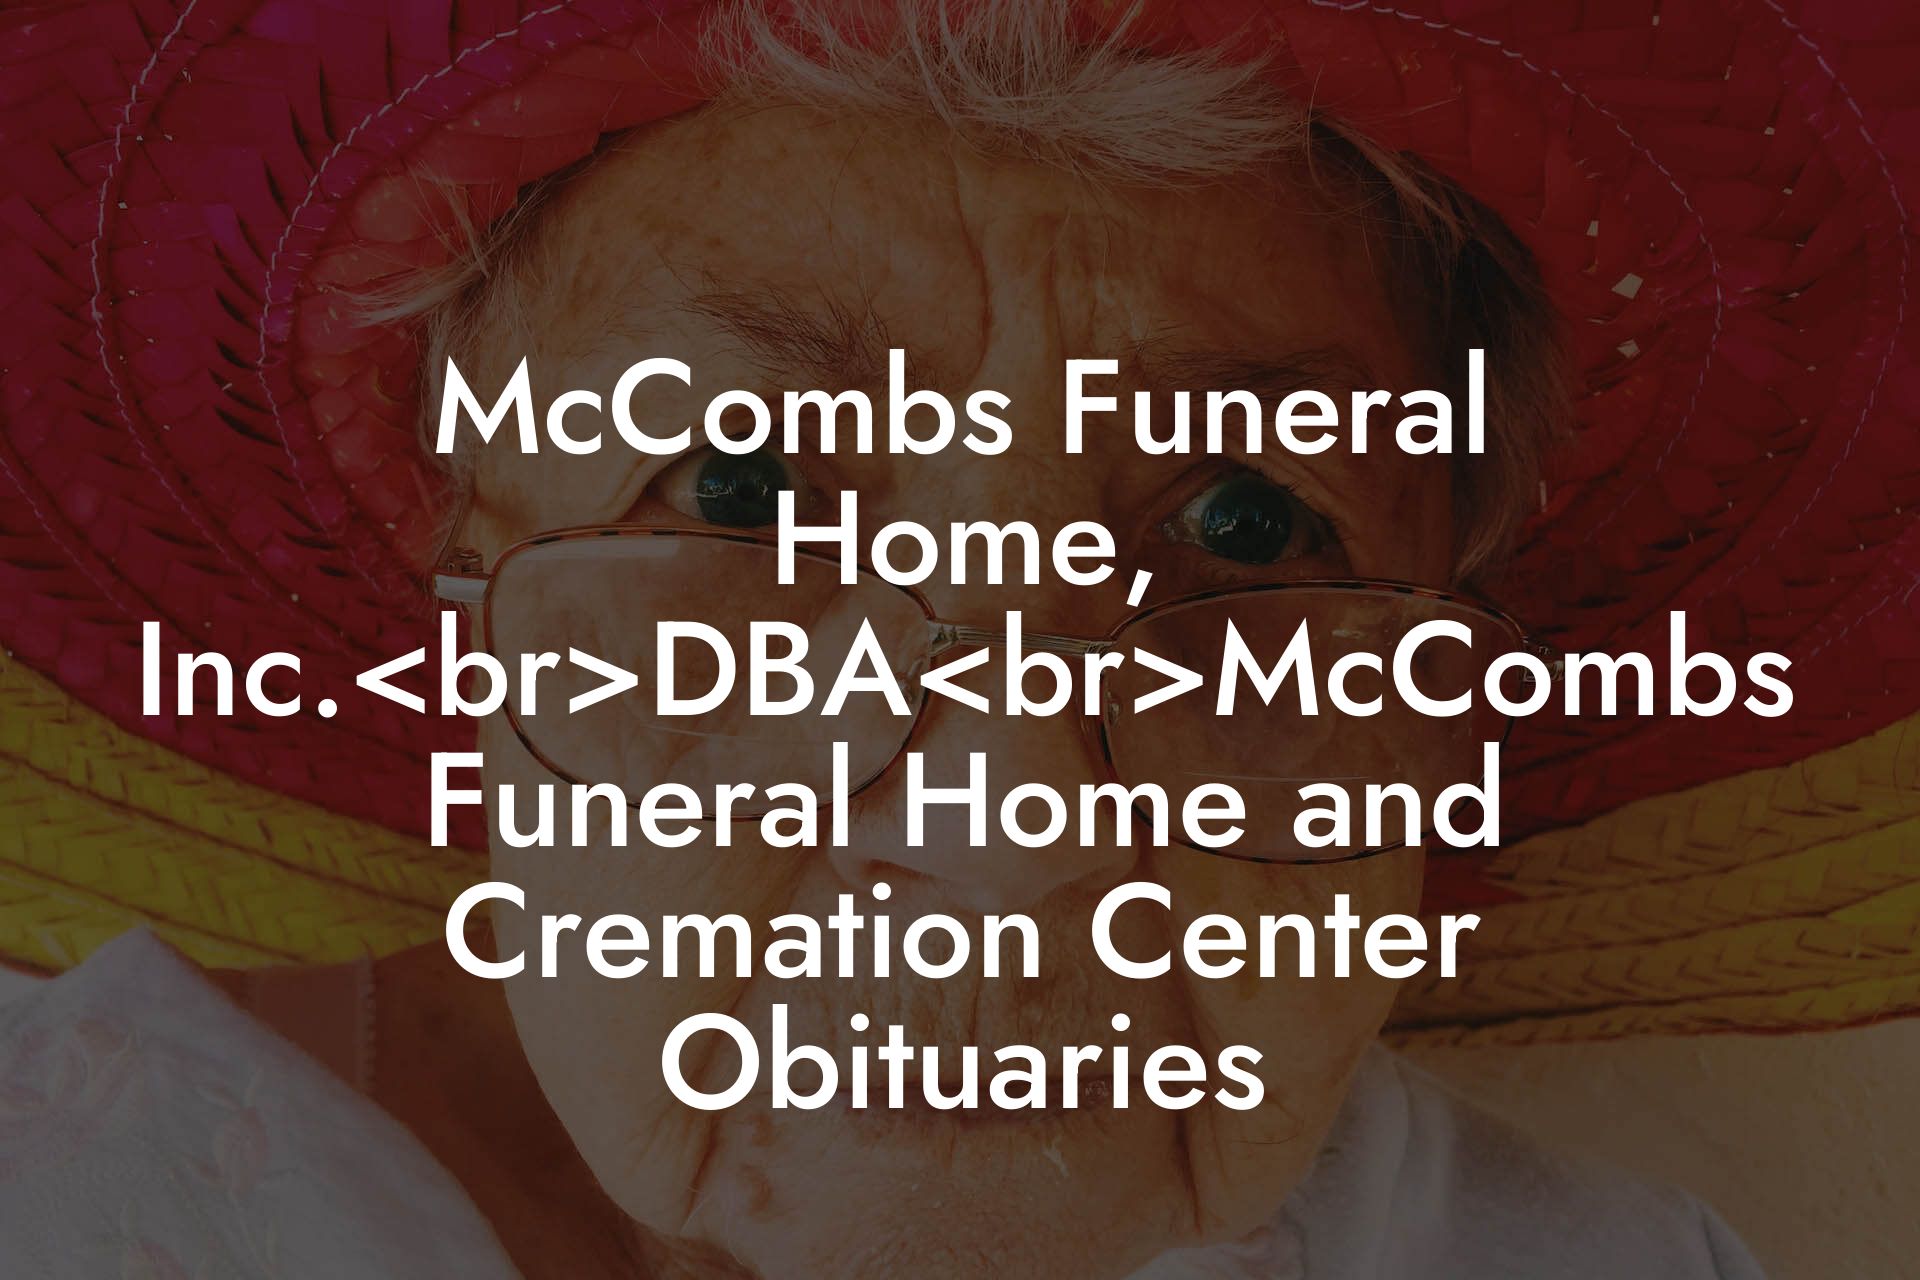 McCombs Funeral Home, Inc.DBAMcCombs Funeral Home and Cremation Center Obituaries